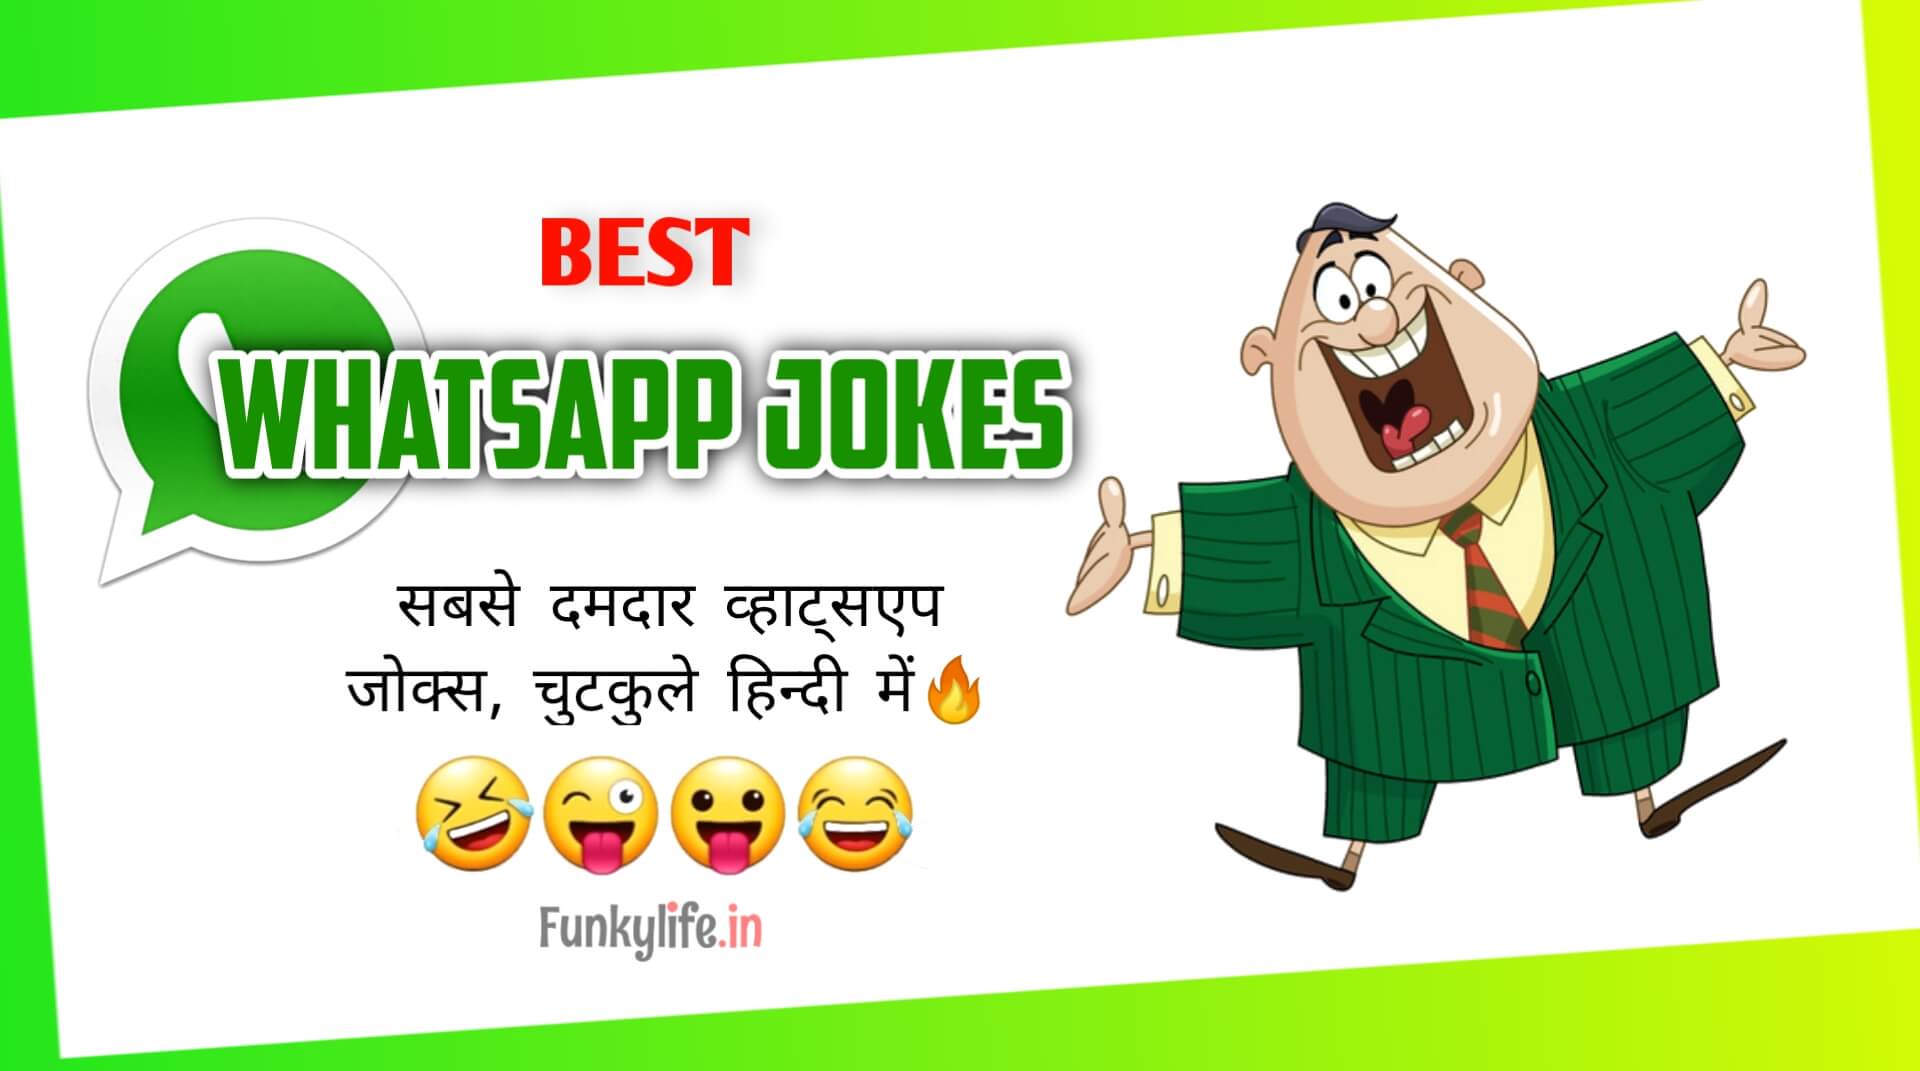 Best dating funny jokes in hindi for whatsapp 2022